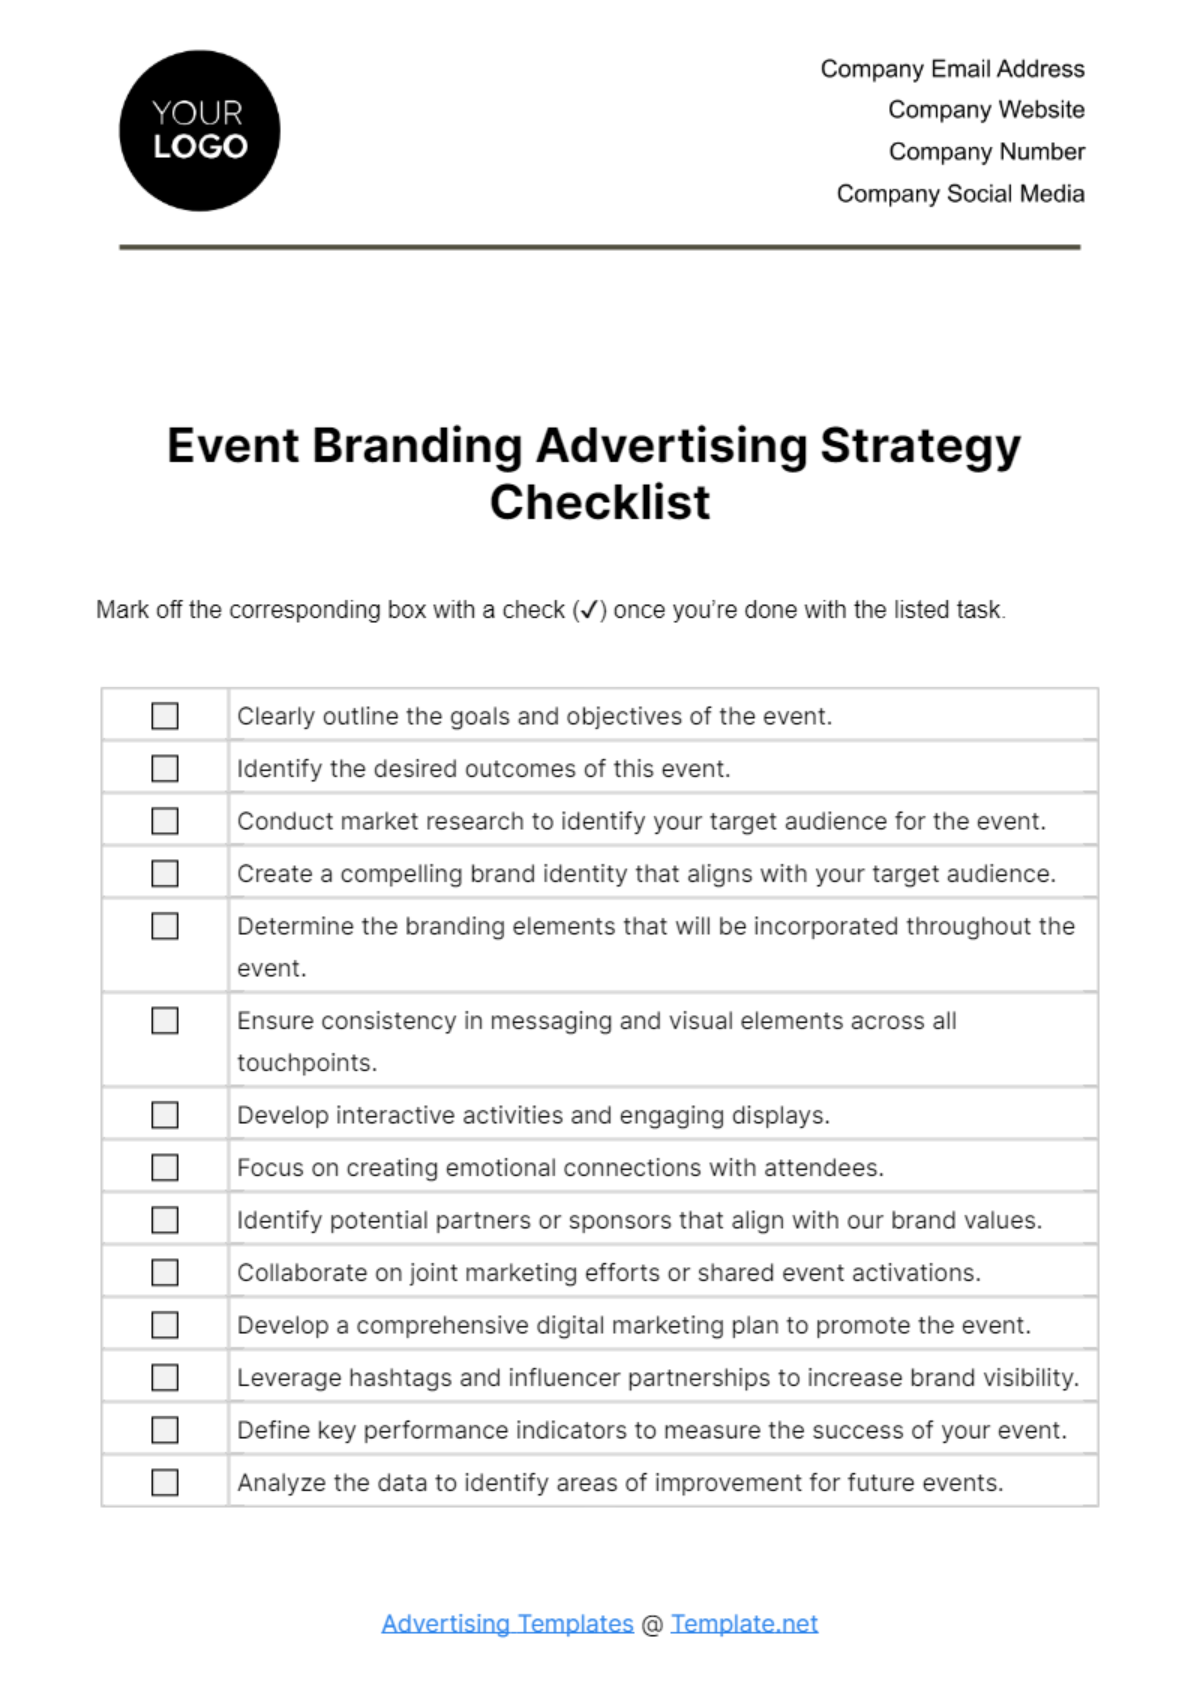 Event Branding Advertising Strategy Checklist Template